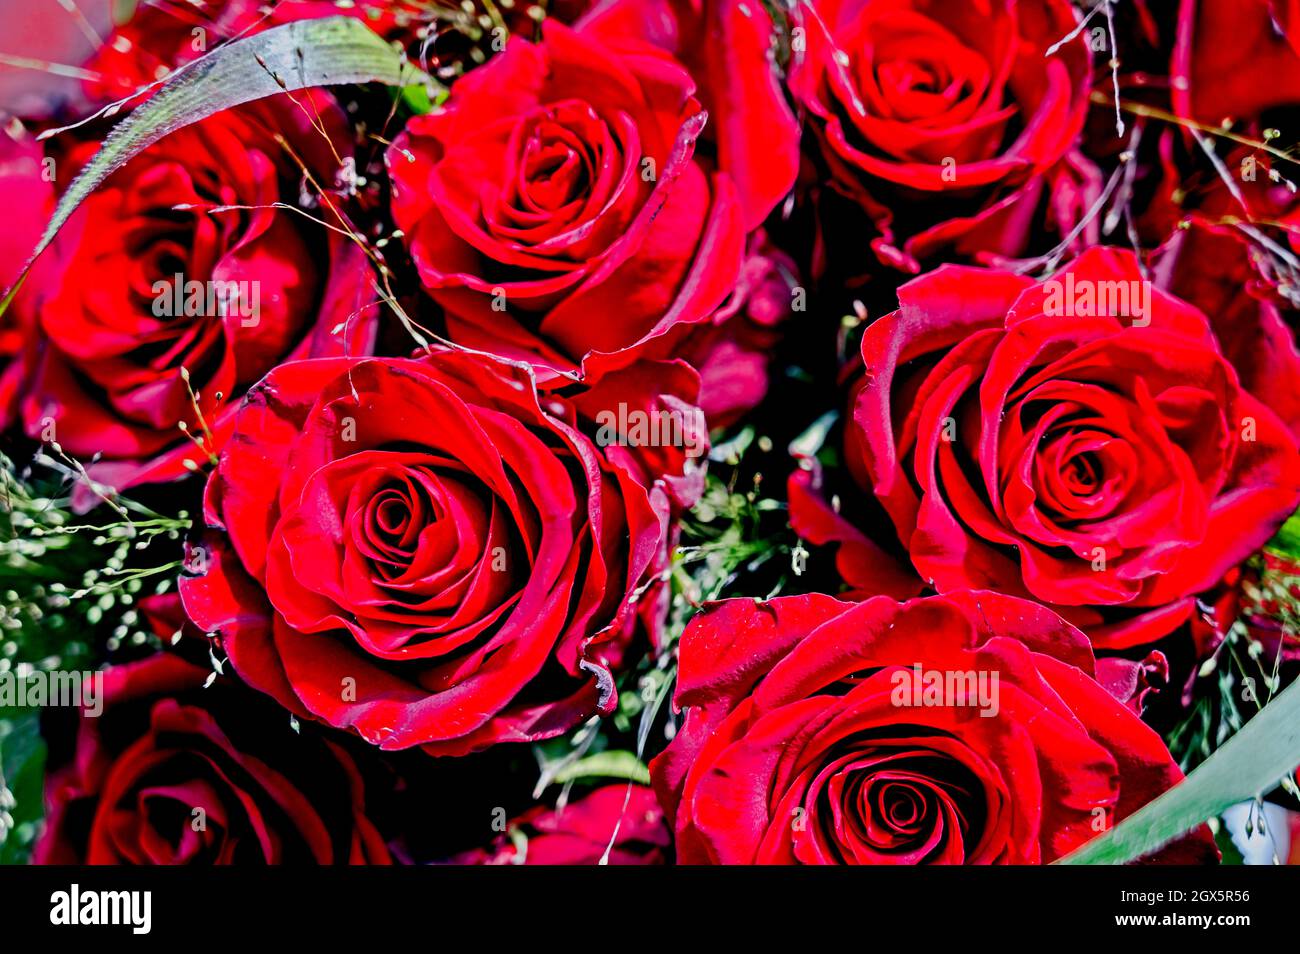 Bouquet of red roses; Strauß roter Rosen Stock Photo